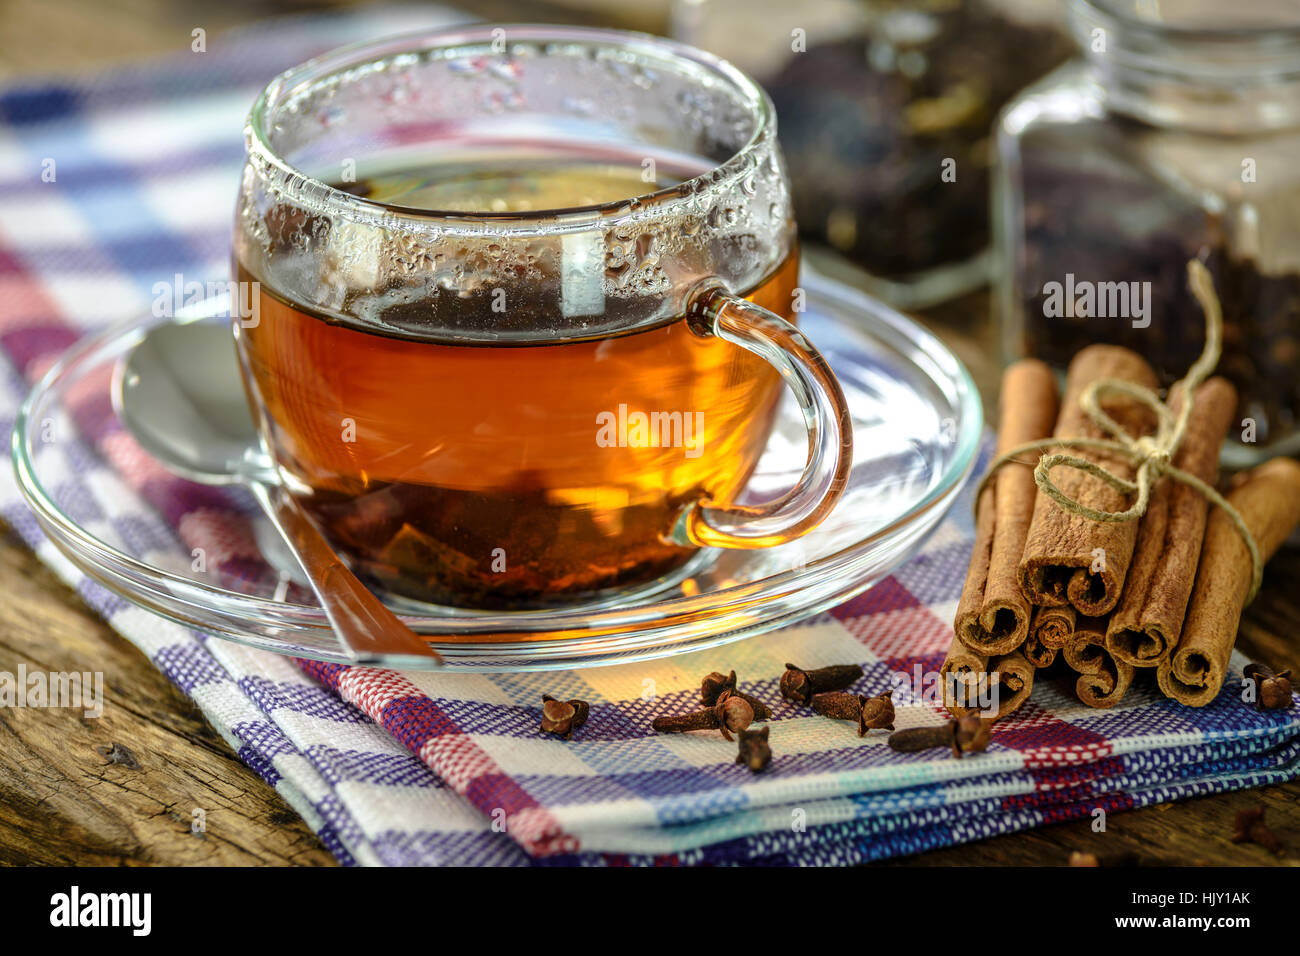 Natural and aromatic cup of tea with cinnamon and cloves in vintage style Stock Photo